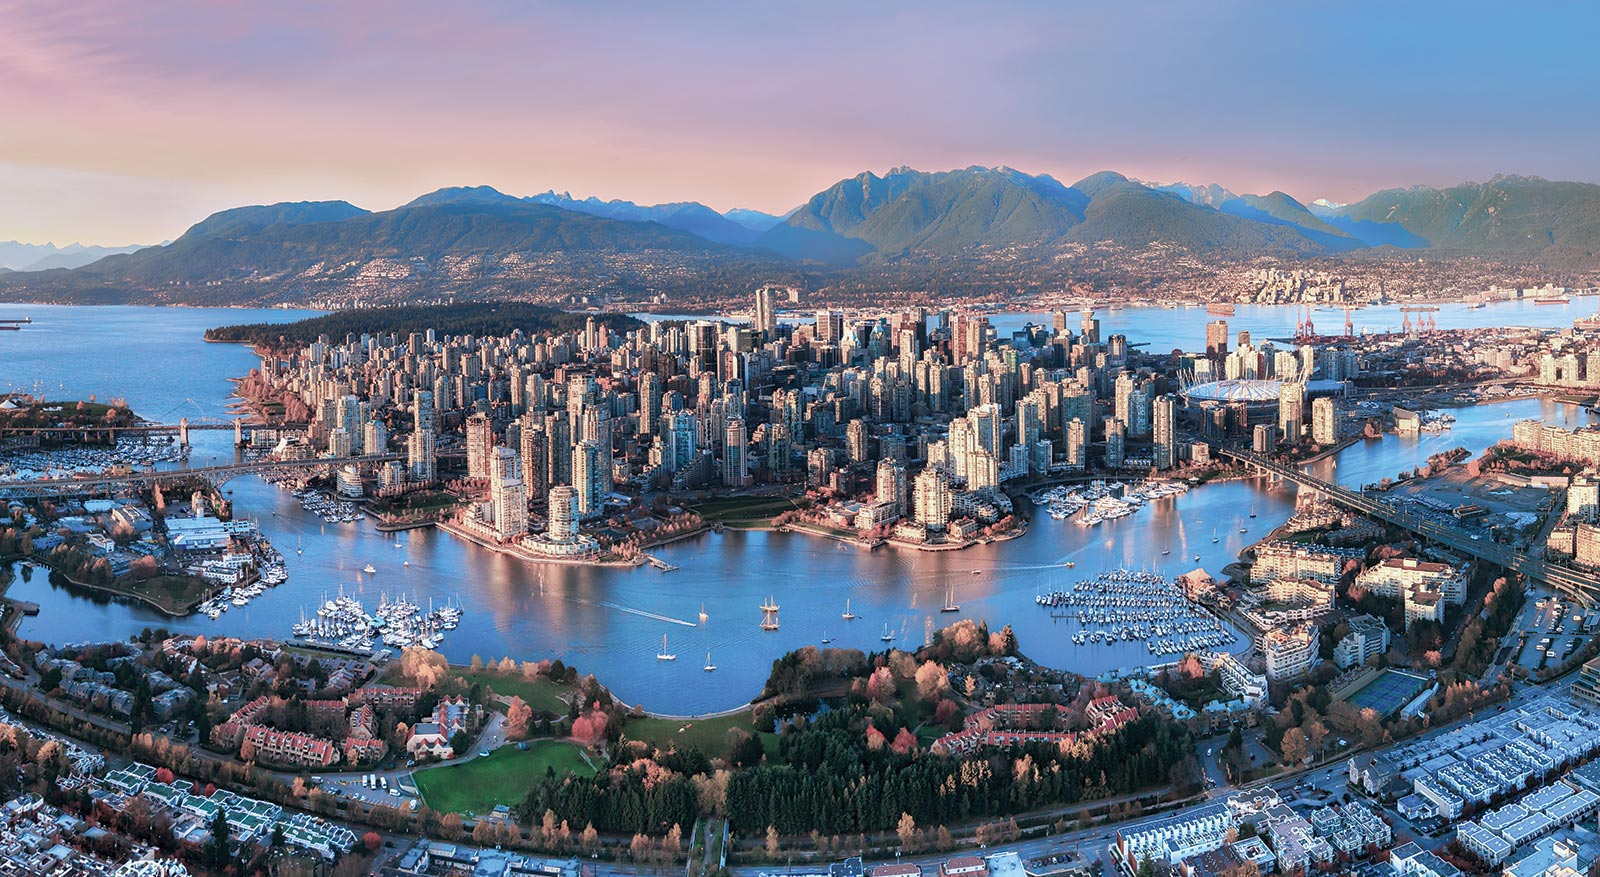 Royals renting in Canada, Vancouver cheaper than London for rentals… - https://roomslocal.co.uk/blog/royals-renting-in-canada-vancouver-cheaper-than-london-for-rentals #renting #canada #vancouver #cheaper #than